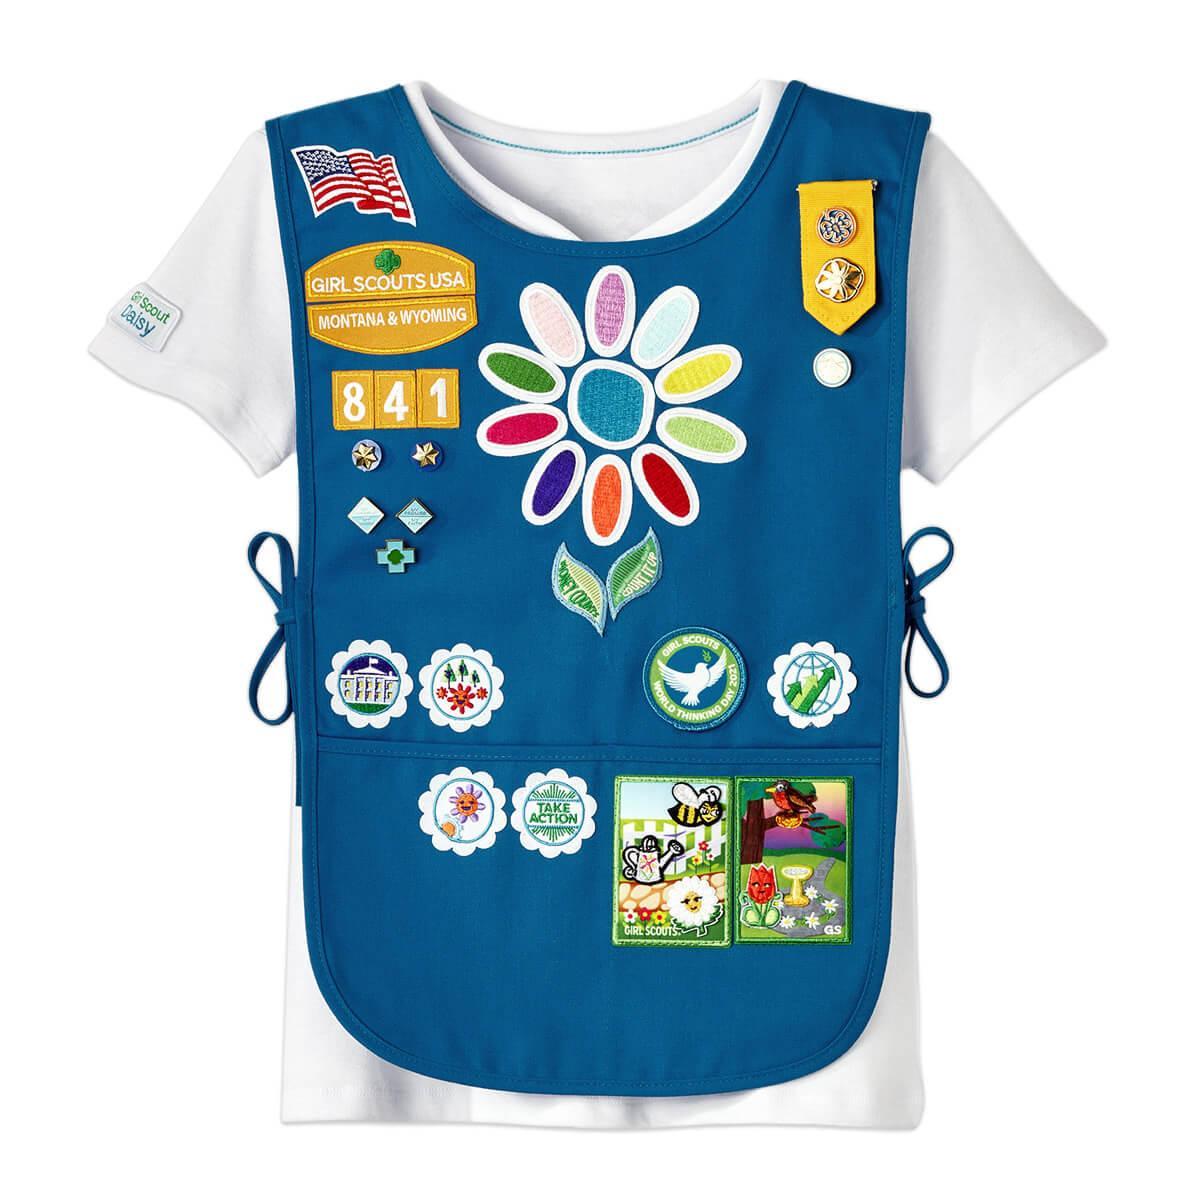 Daisies vest badge placement slippery vests